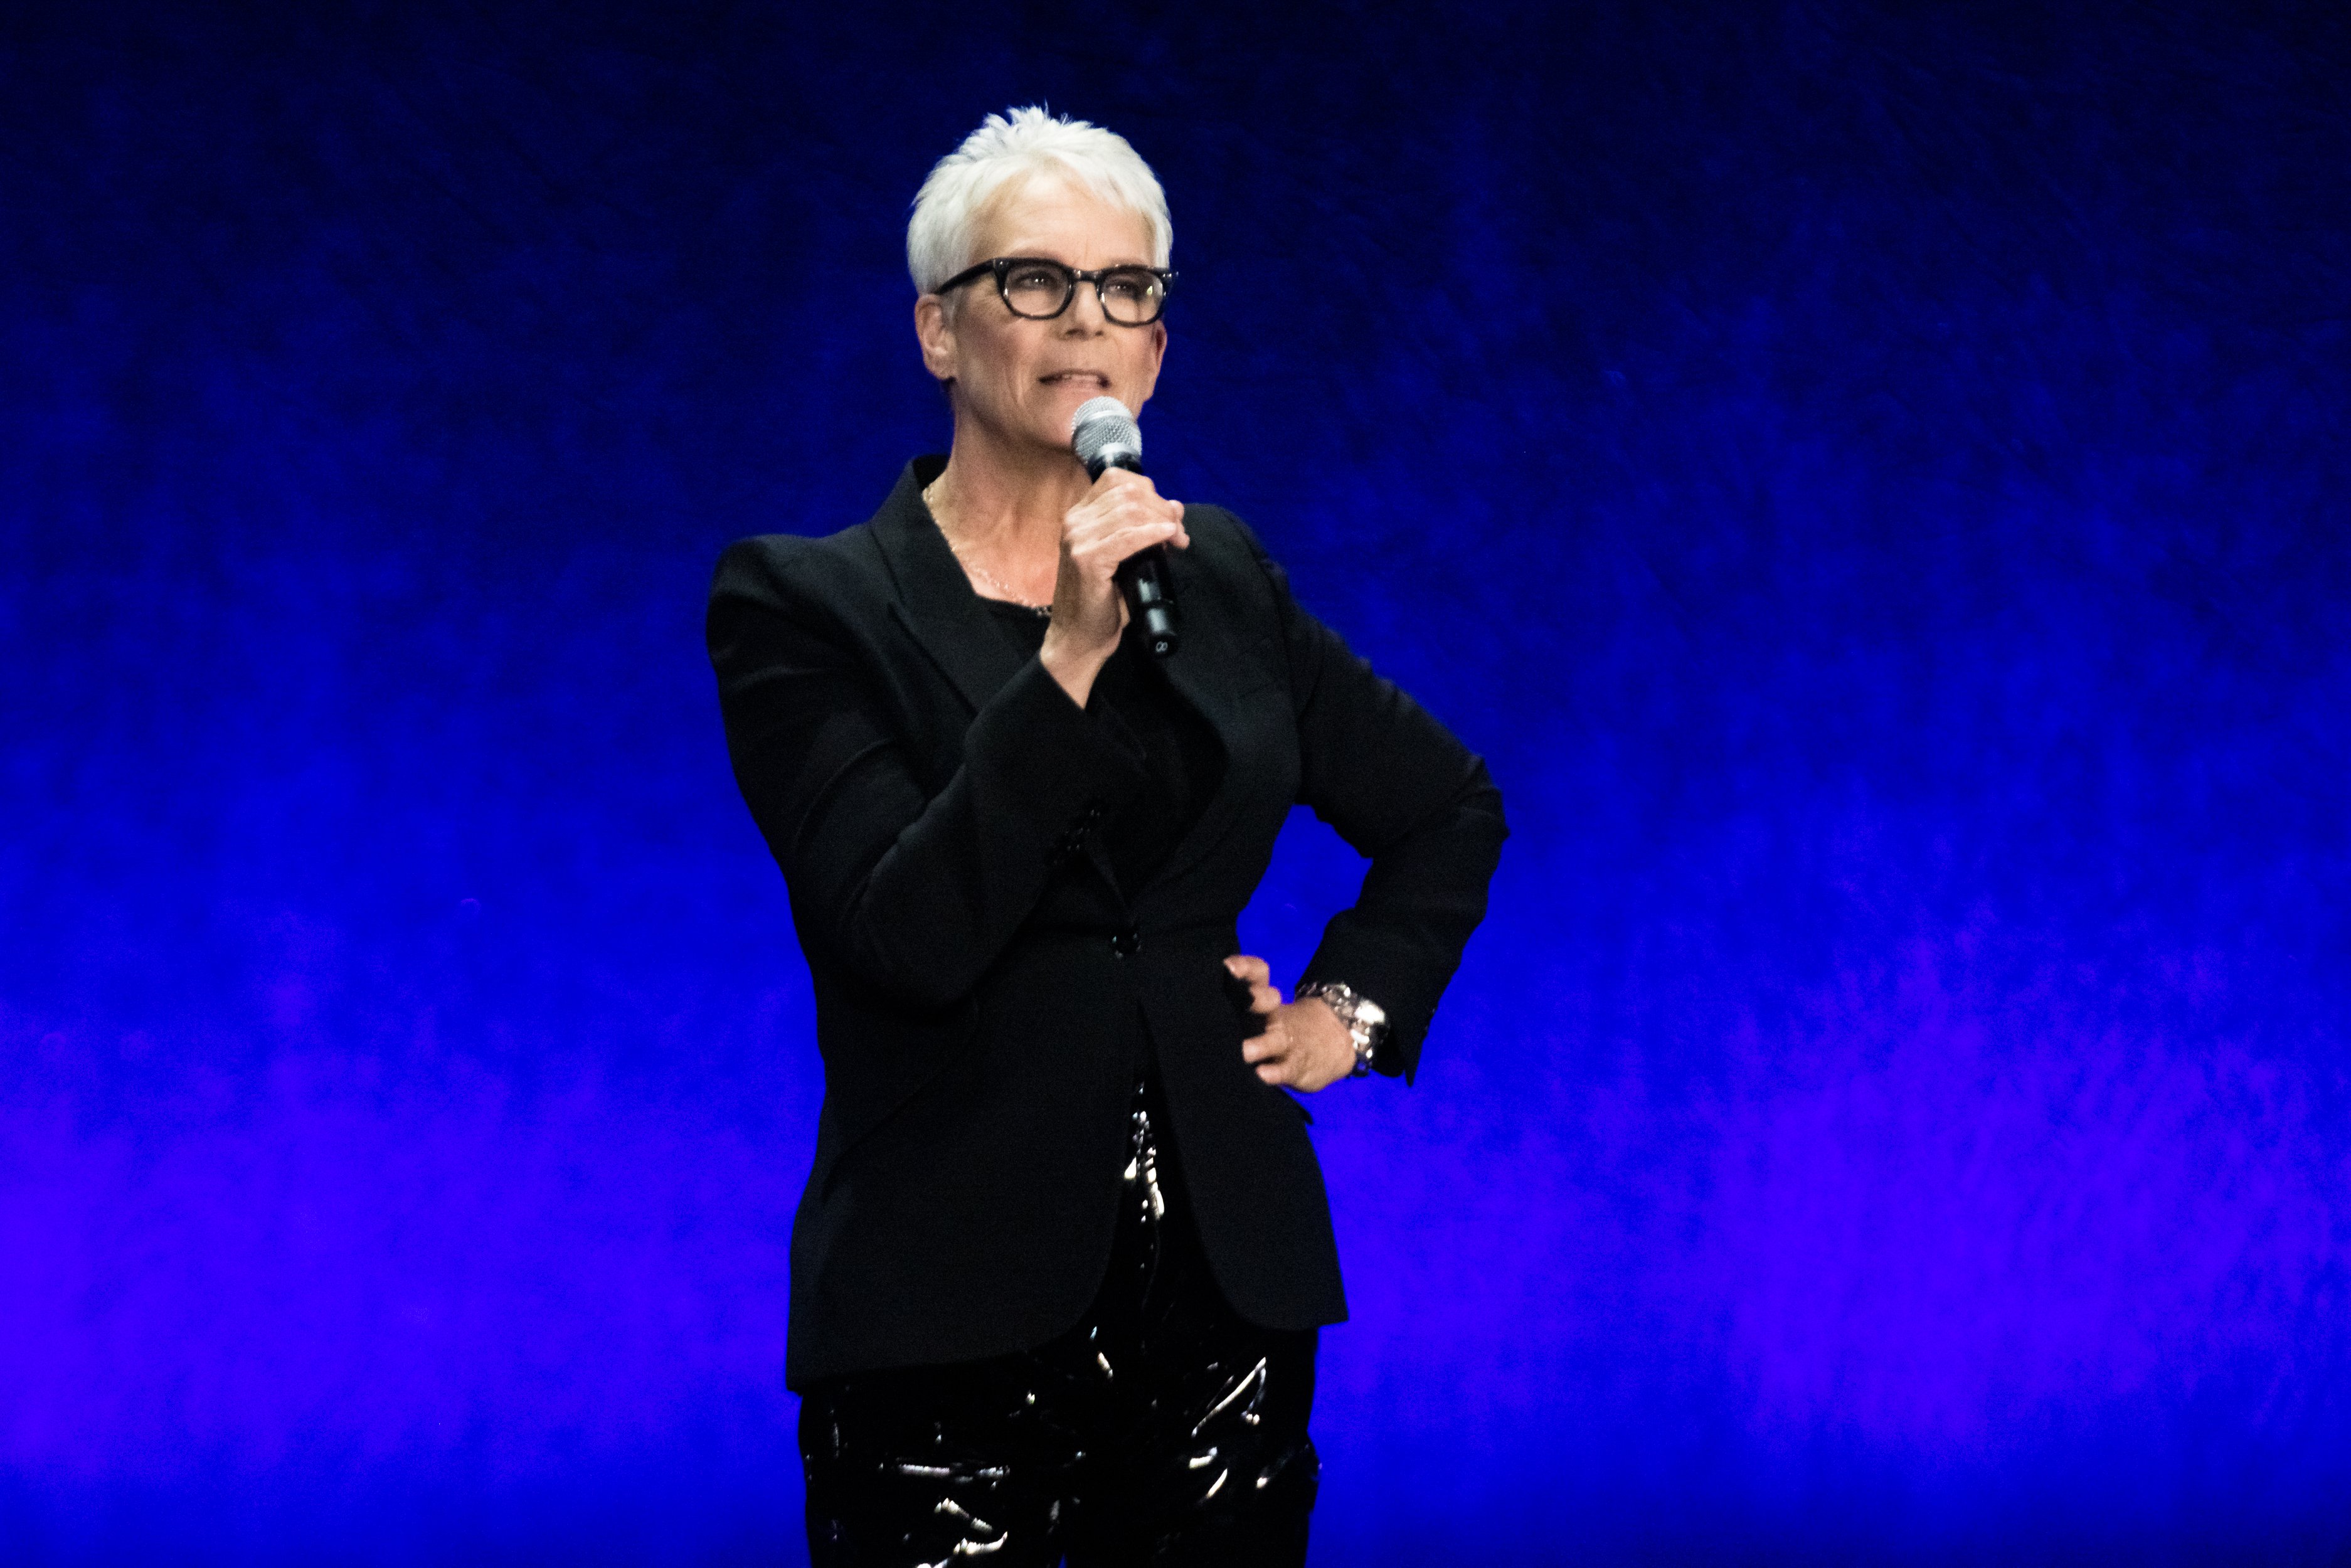 Jamie Lee Curtis speaks about her upcoming movie "Halloween Ends" during Universal Pictures and Focus Features special presentation at Caesars Palace during CinemaCon 2022 on April 27, 2022 in Las Vegas, Nevada. | Source: Getty Images